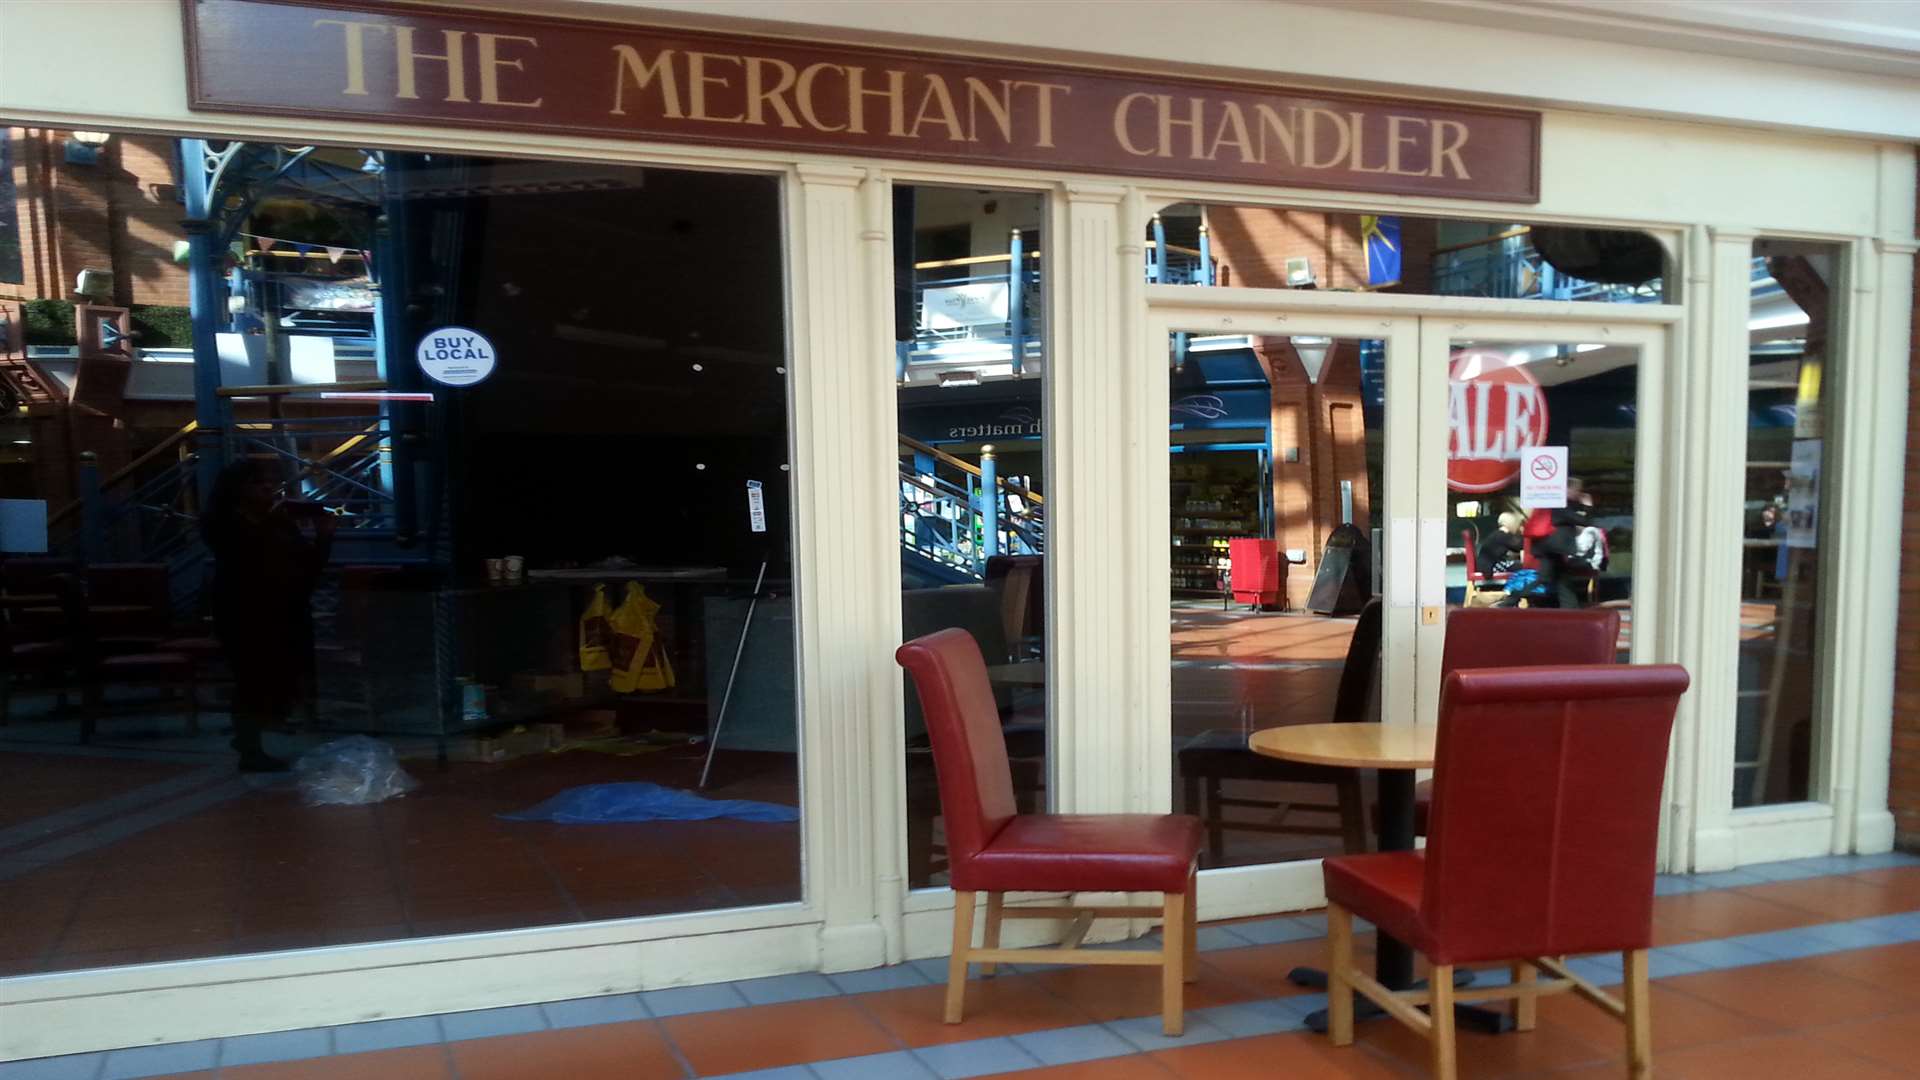 The closed Merchant Chandler shop in Maidstone